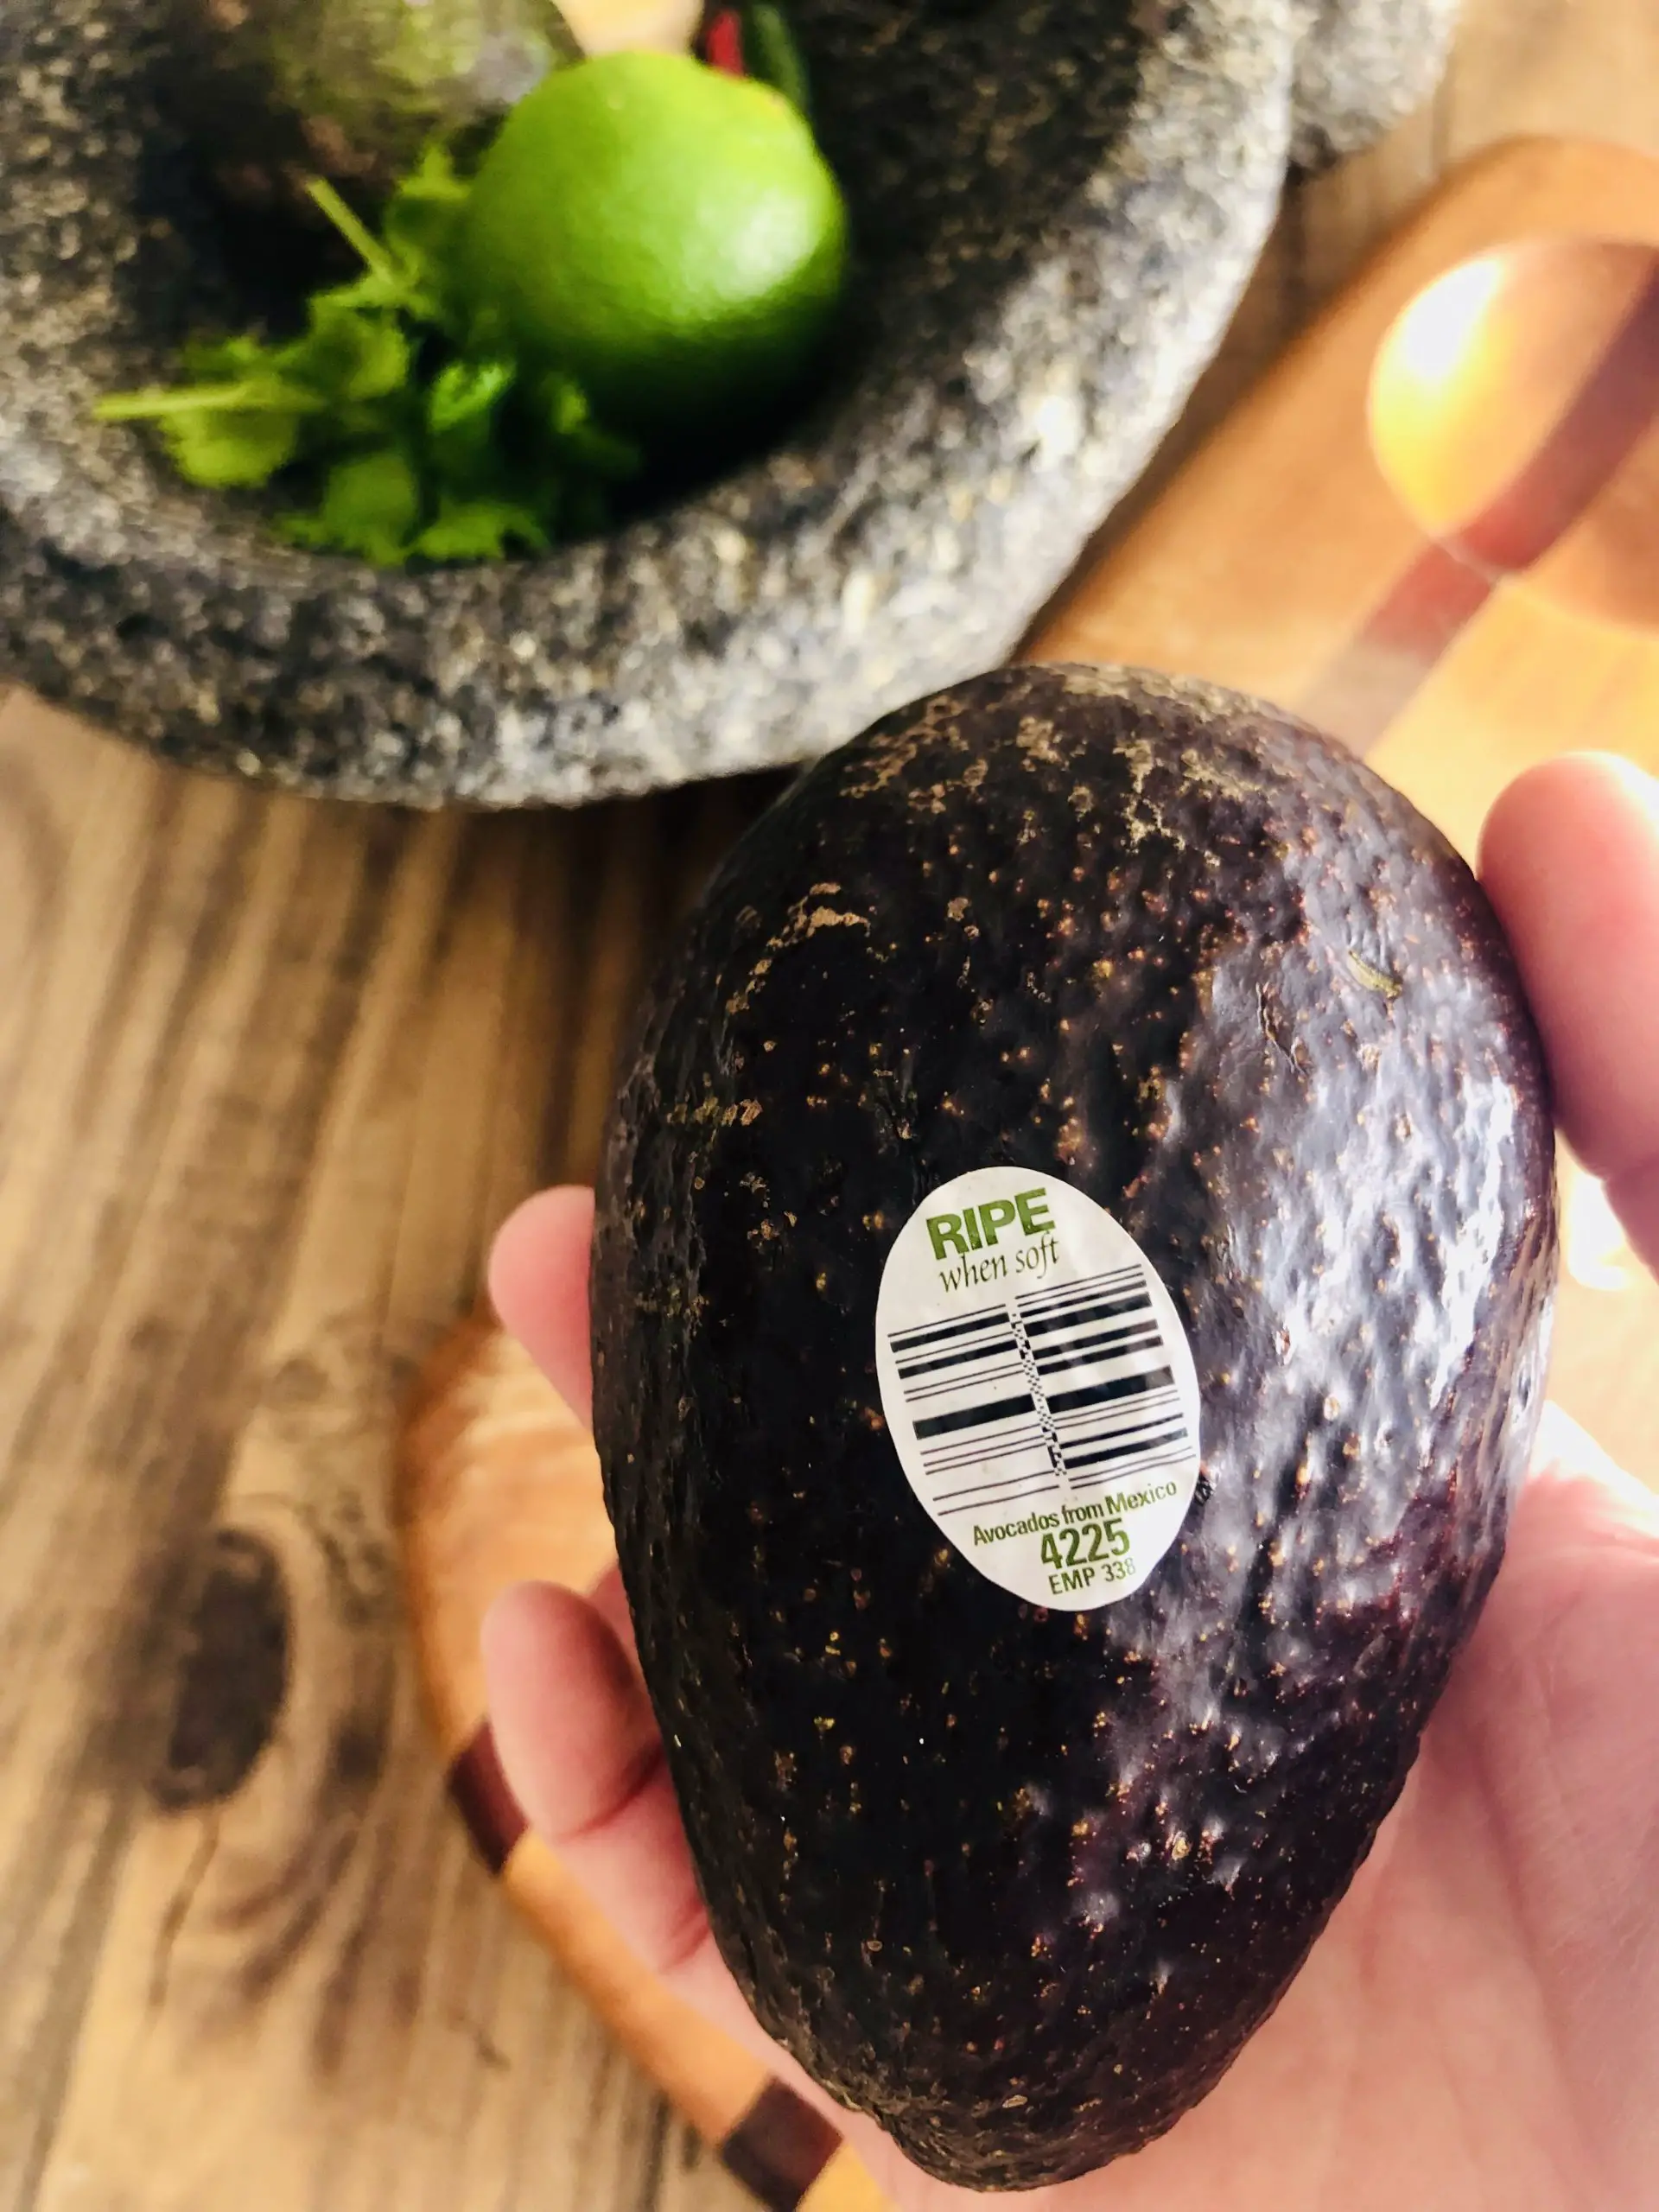 Hand holding an avocado with a sticker that says Ripe when soft, and a molcajete filled with lime, cilantro, and avocado